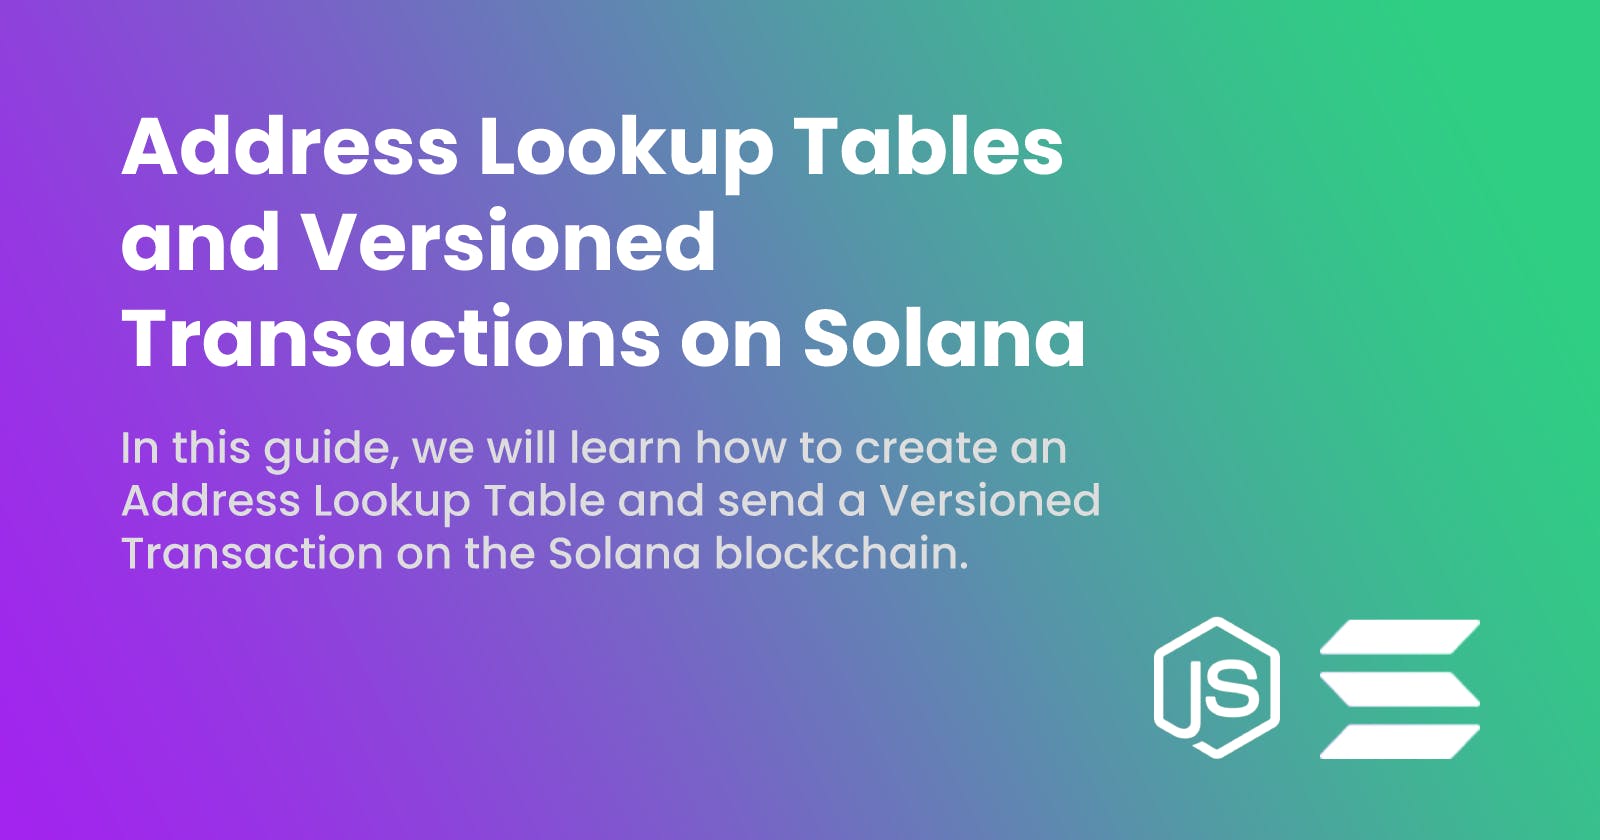 Address Lookup Tables and Versioned Transactions on Solana